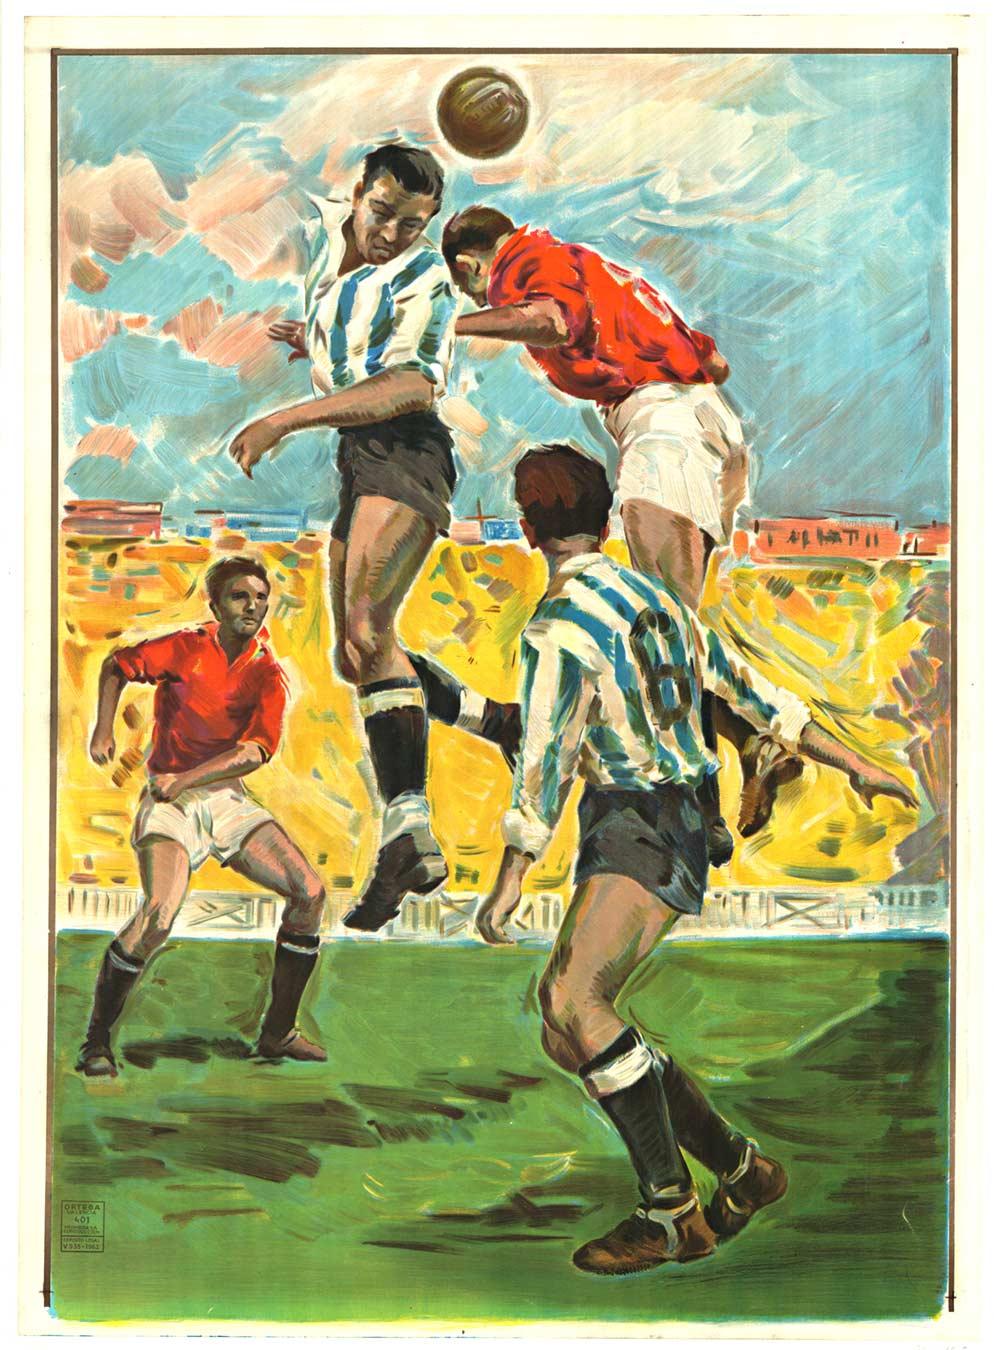 Unknown Figurative Print - Original 'Soccer' vintage lithograph posters a.k.a. "Heads Up", Spain